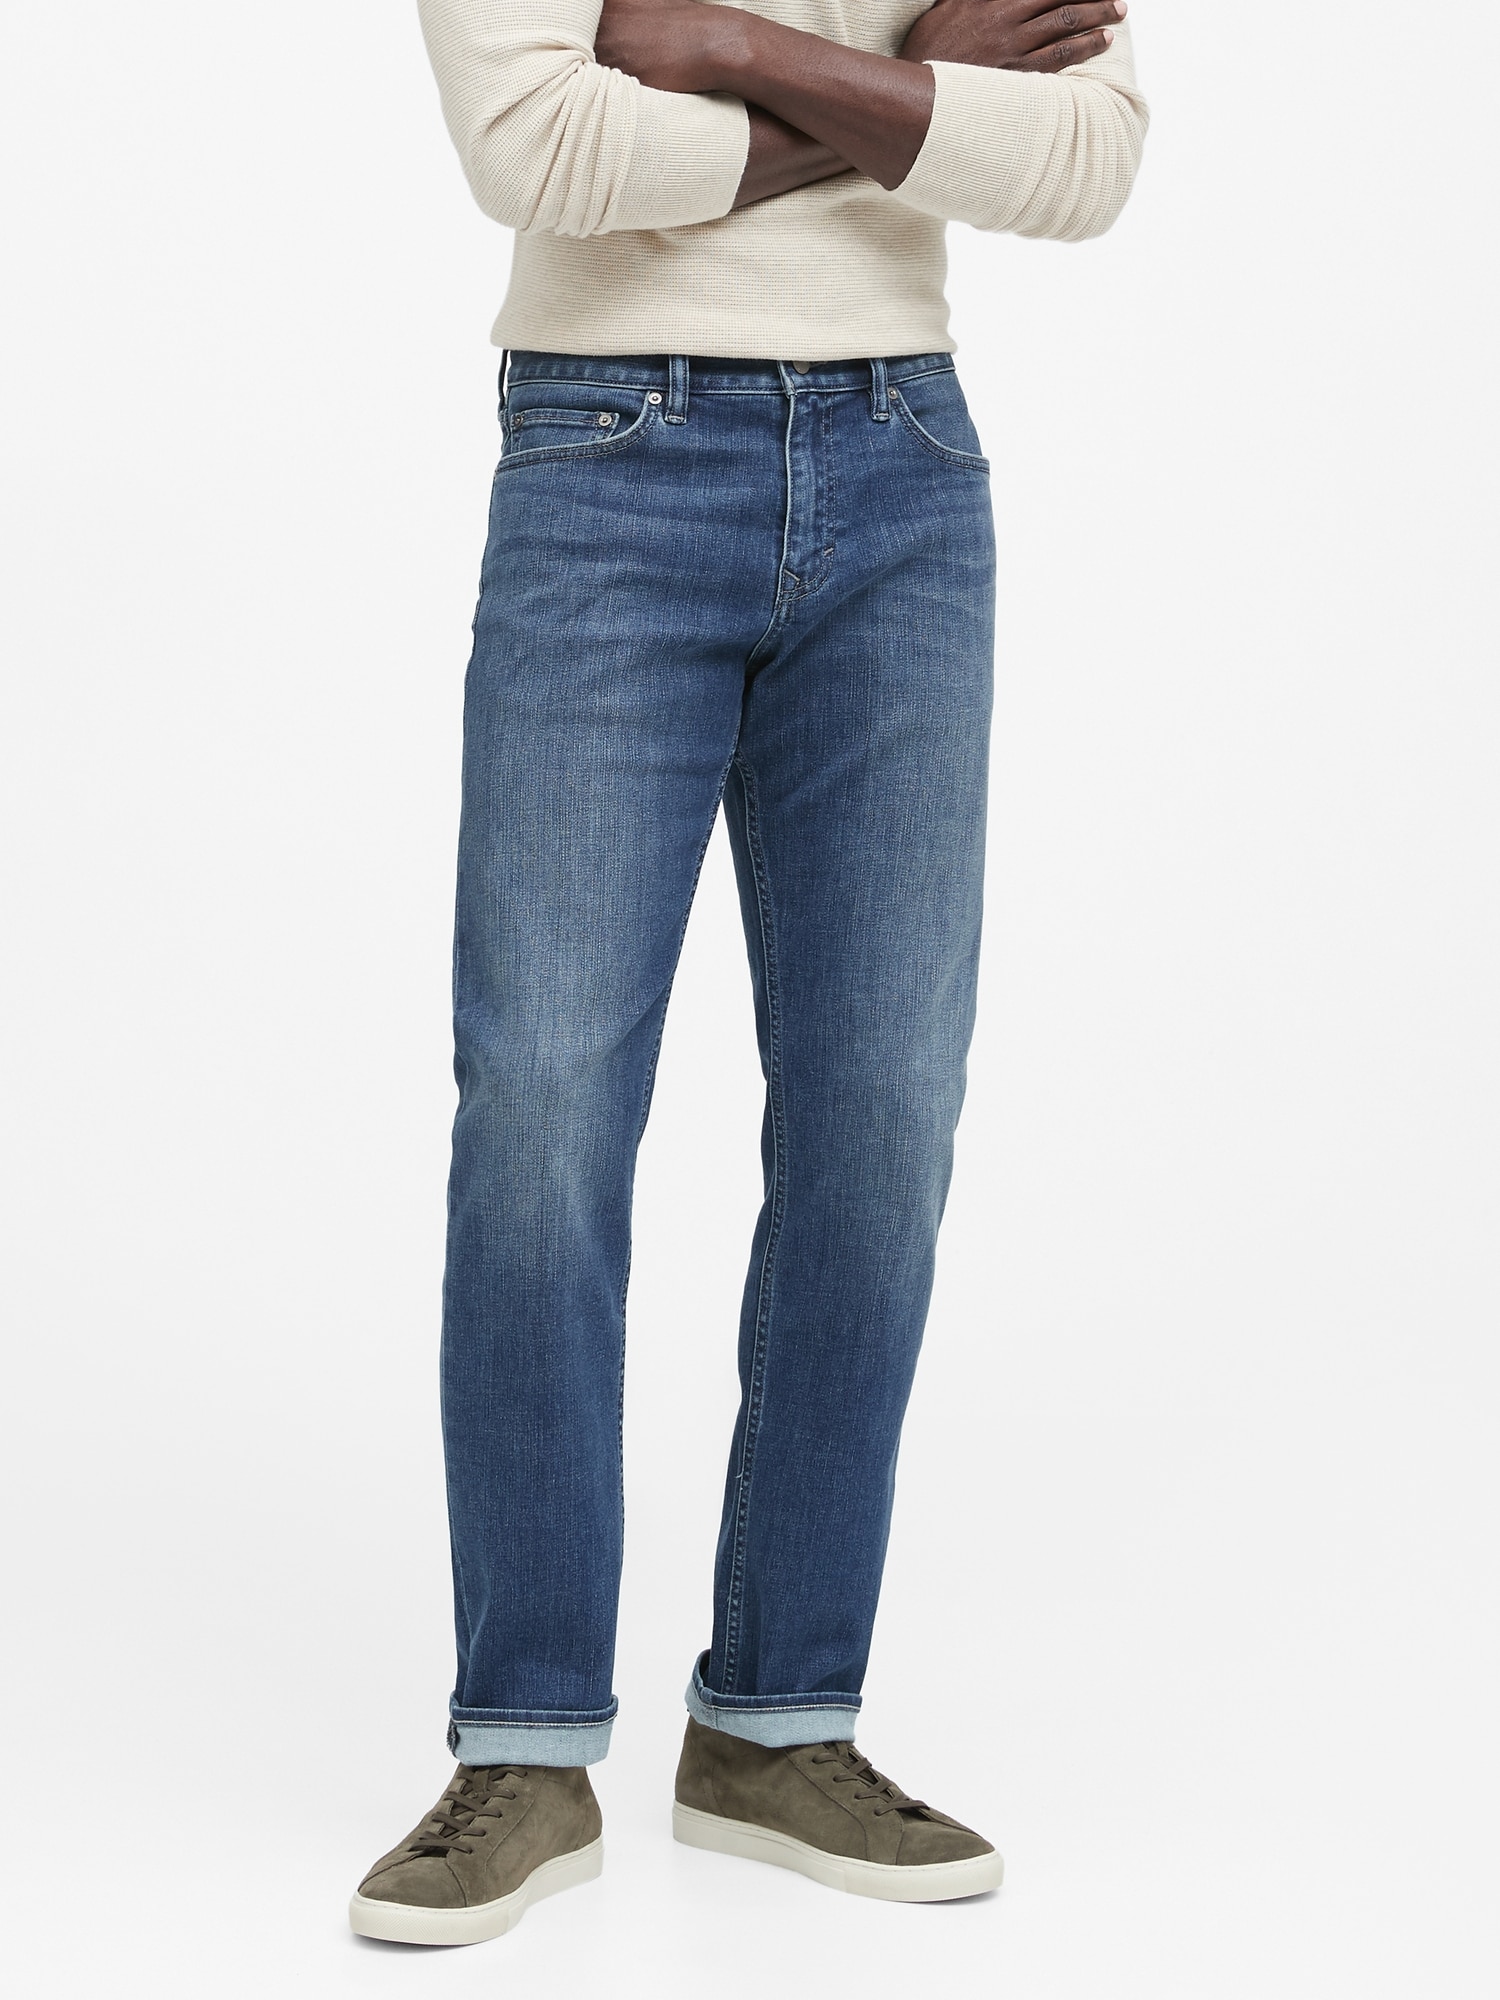 Tapered Rapid Movement Denim Jean with COOLMAX® Technology